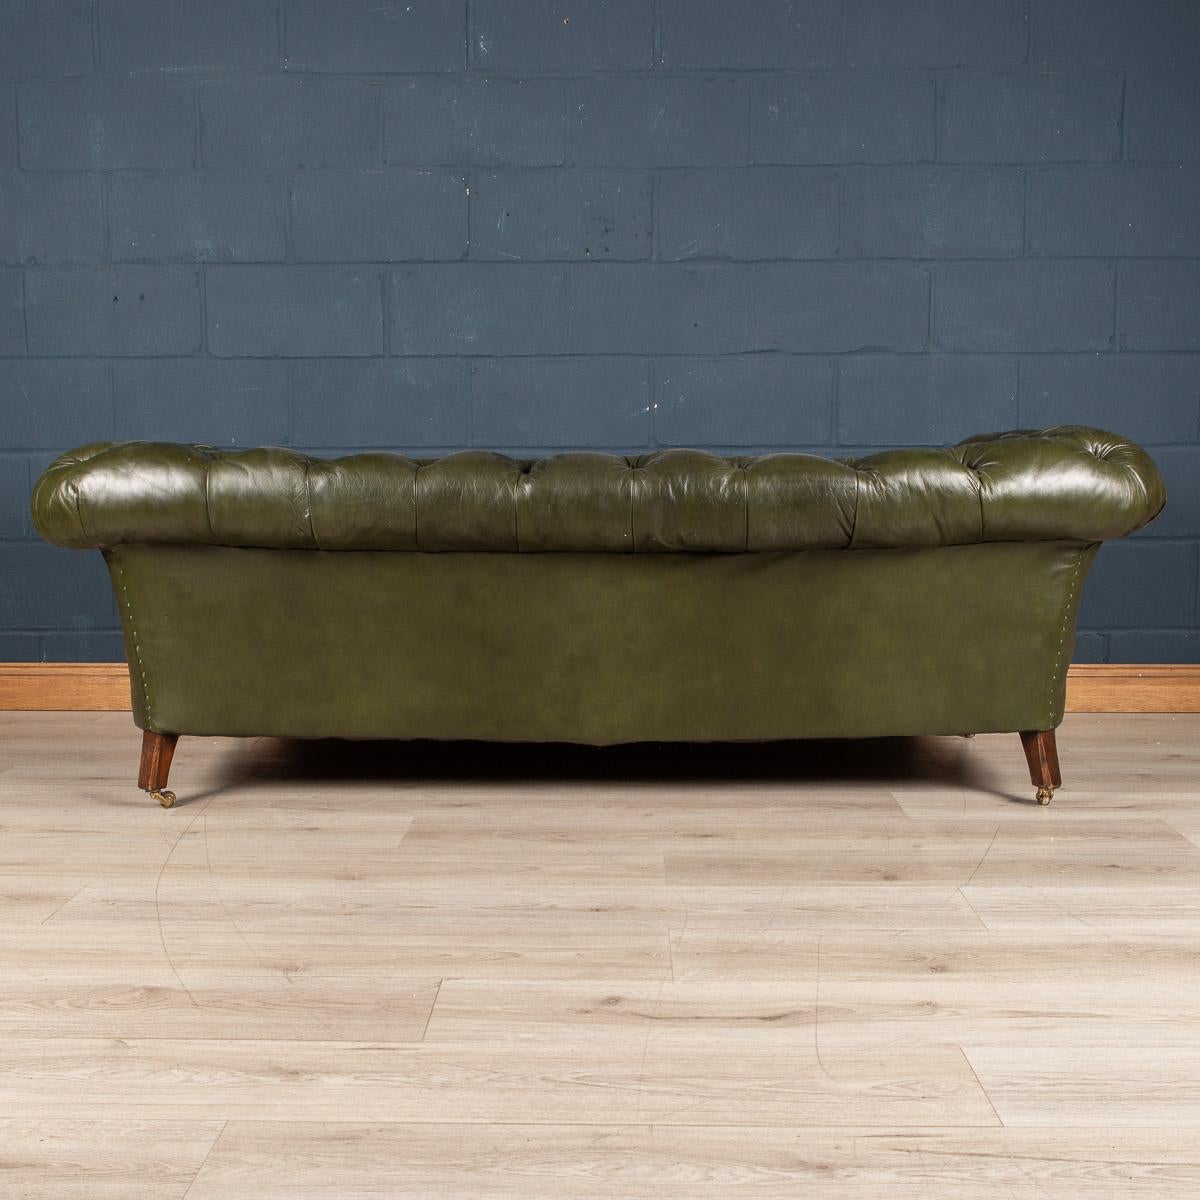 20th Century Victorian Green Leather Chesterfield Sofa, c.1900 In Good Condition In Royal Tunbridge Wells, Kent